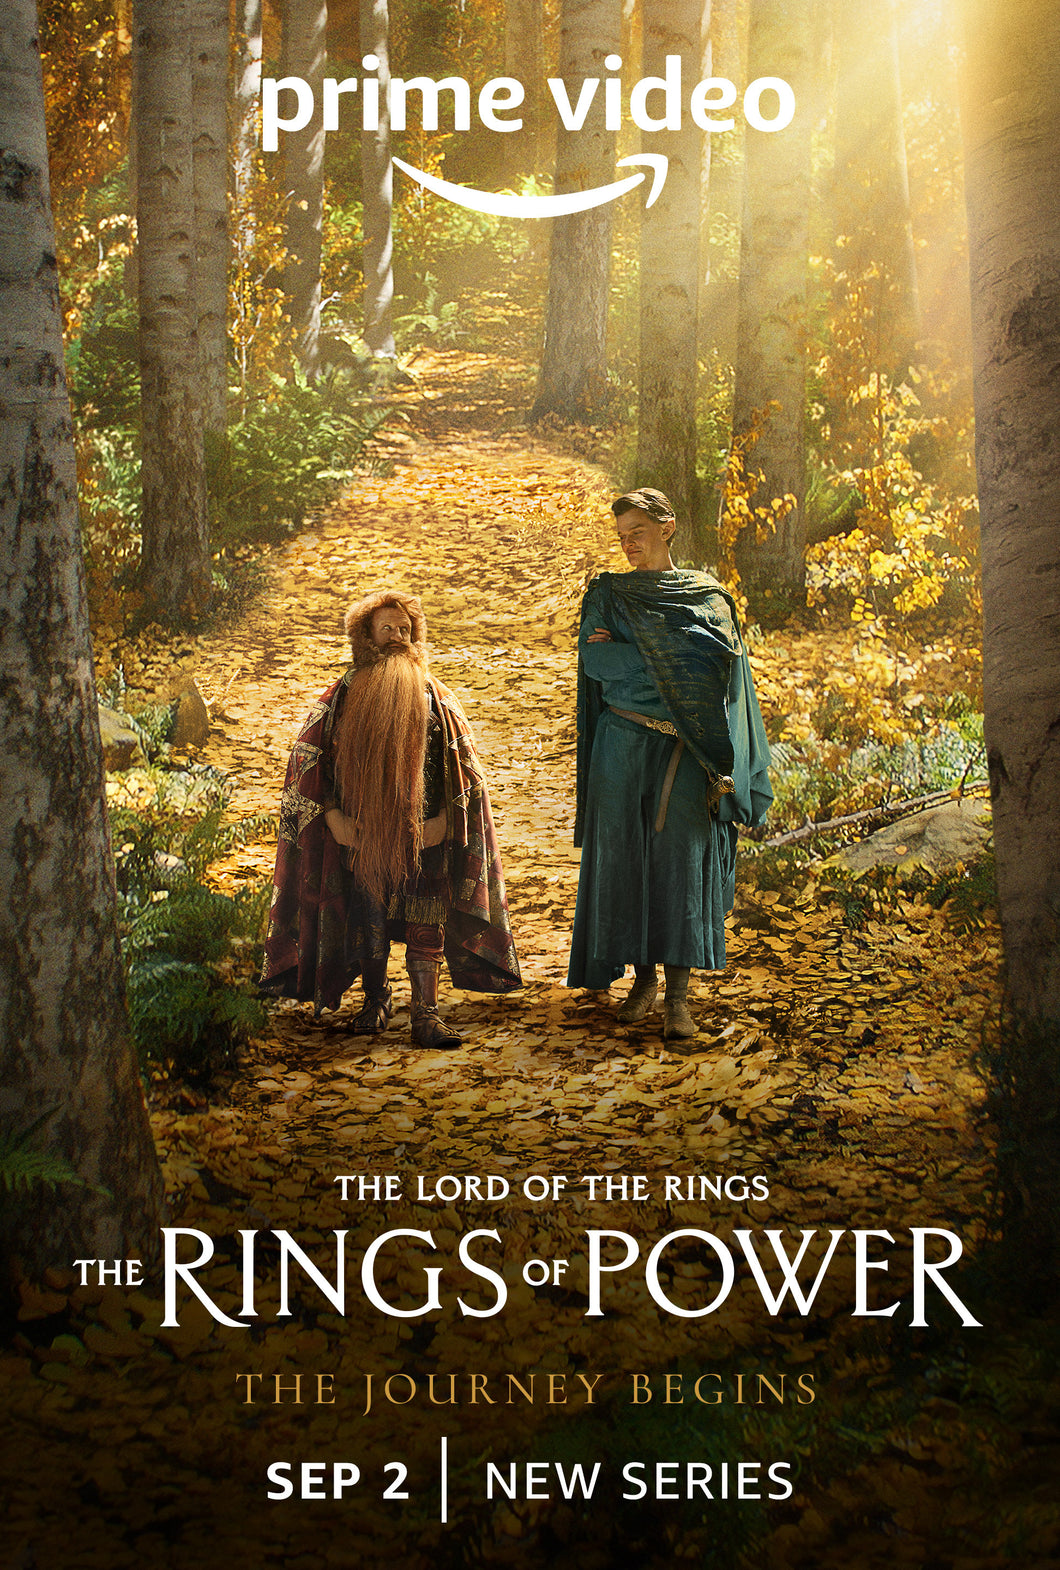 The Lord of the Rings: The Rings of Power: Season 1 Premiere